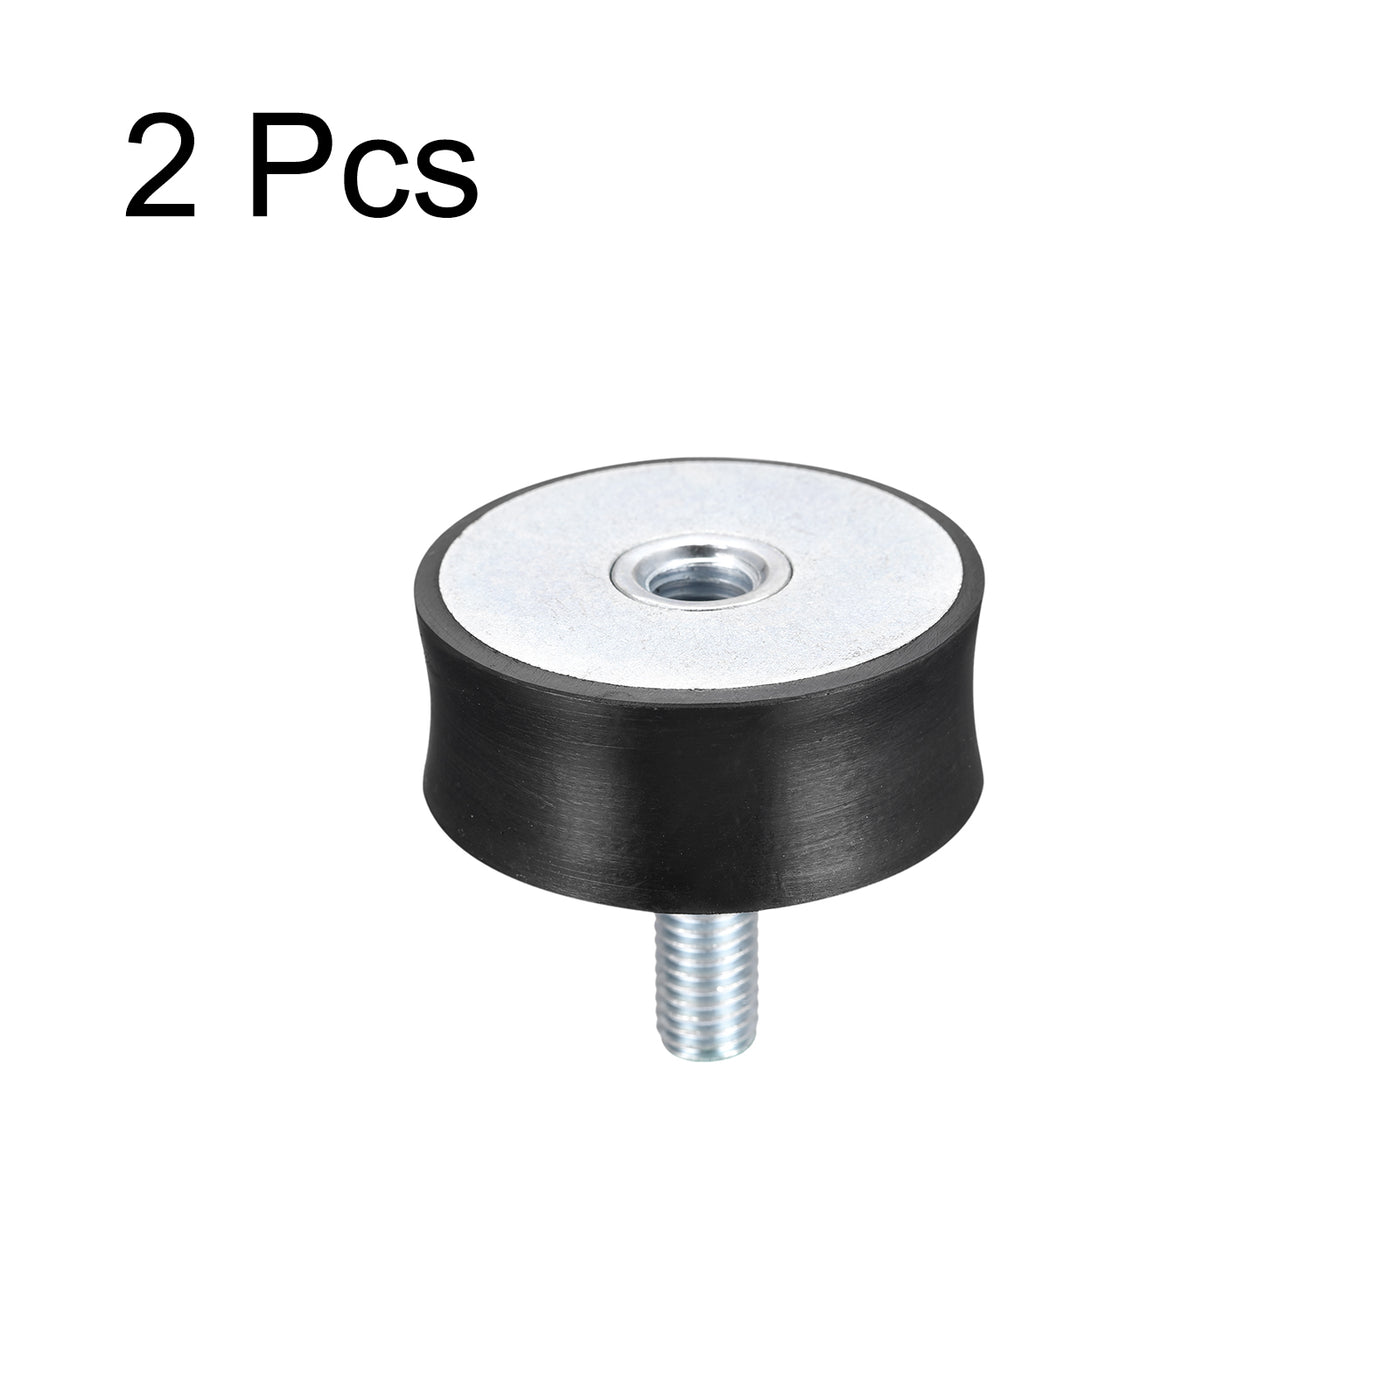 uxcell Uxcell Rubber Mount 2pcs M10 Male/Female Vibration Isolator Shock Absorber D50mmxH20mm